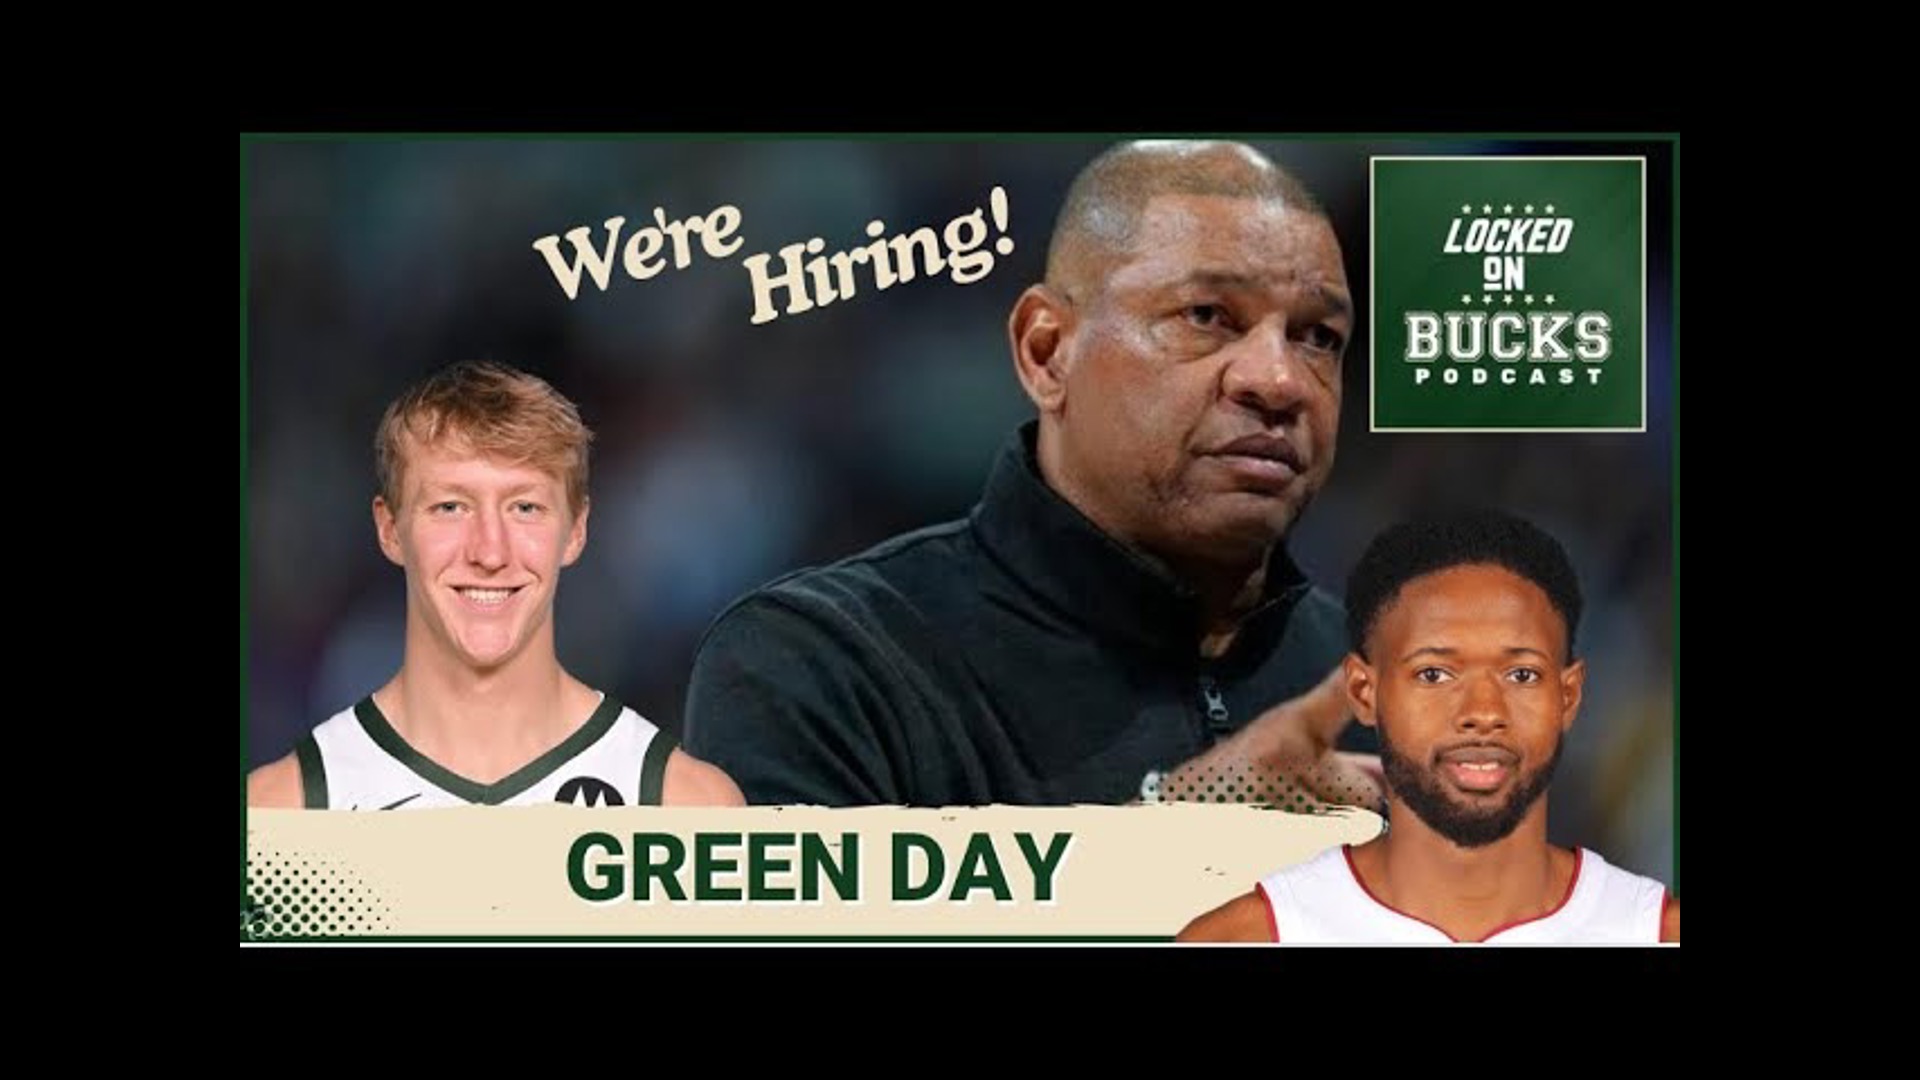 Justin and Camille discuss the official finalized staff for the Bucks and head coach Doc Rivers, including roles for some new names.